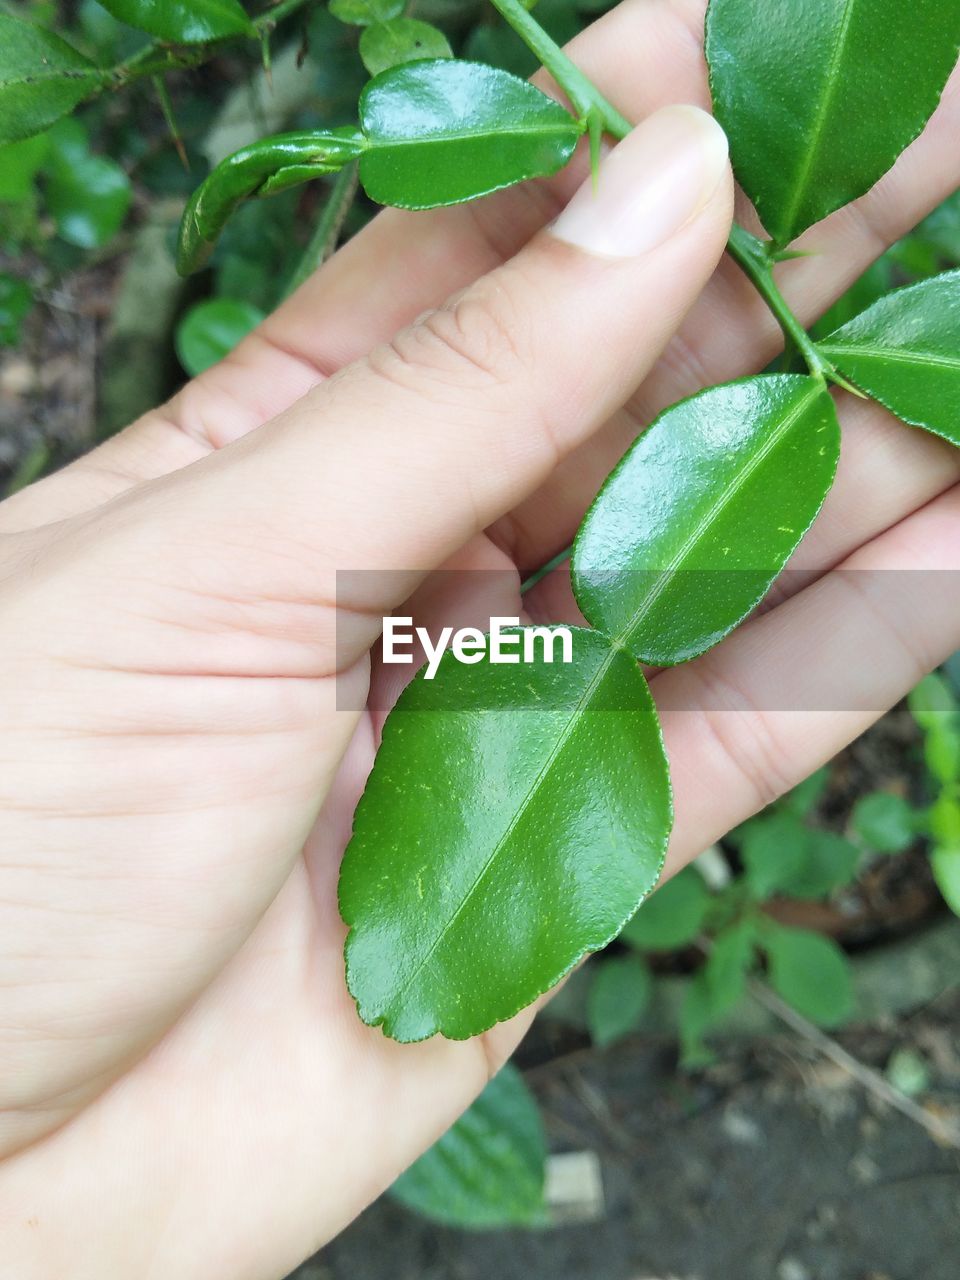 CROPPED IMAGE OF HAND HOLDING GREEN LEAVES